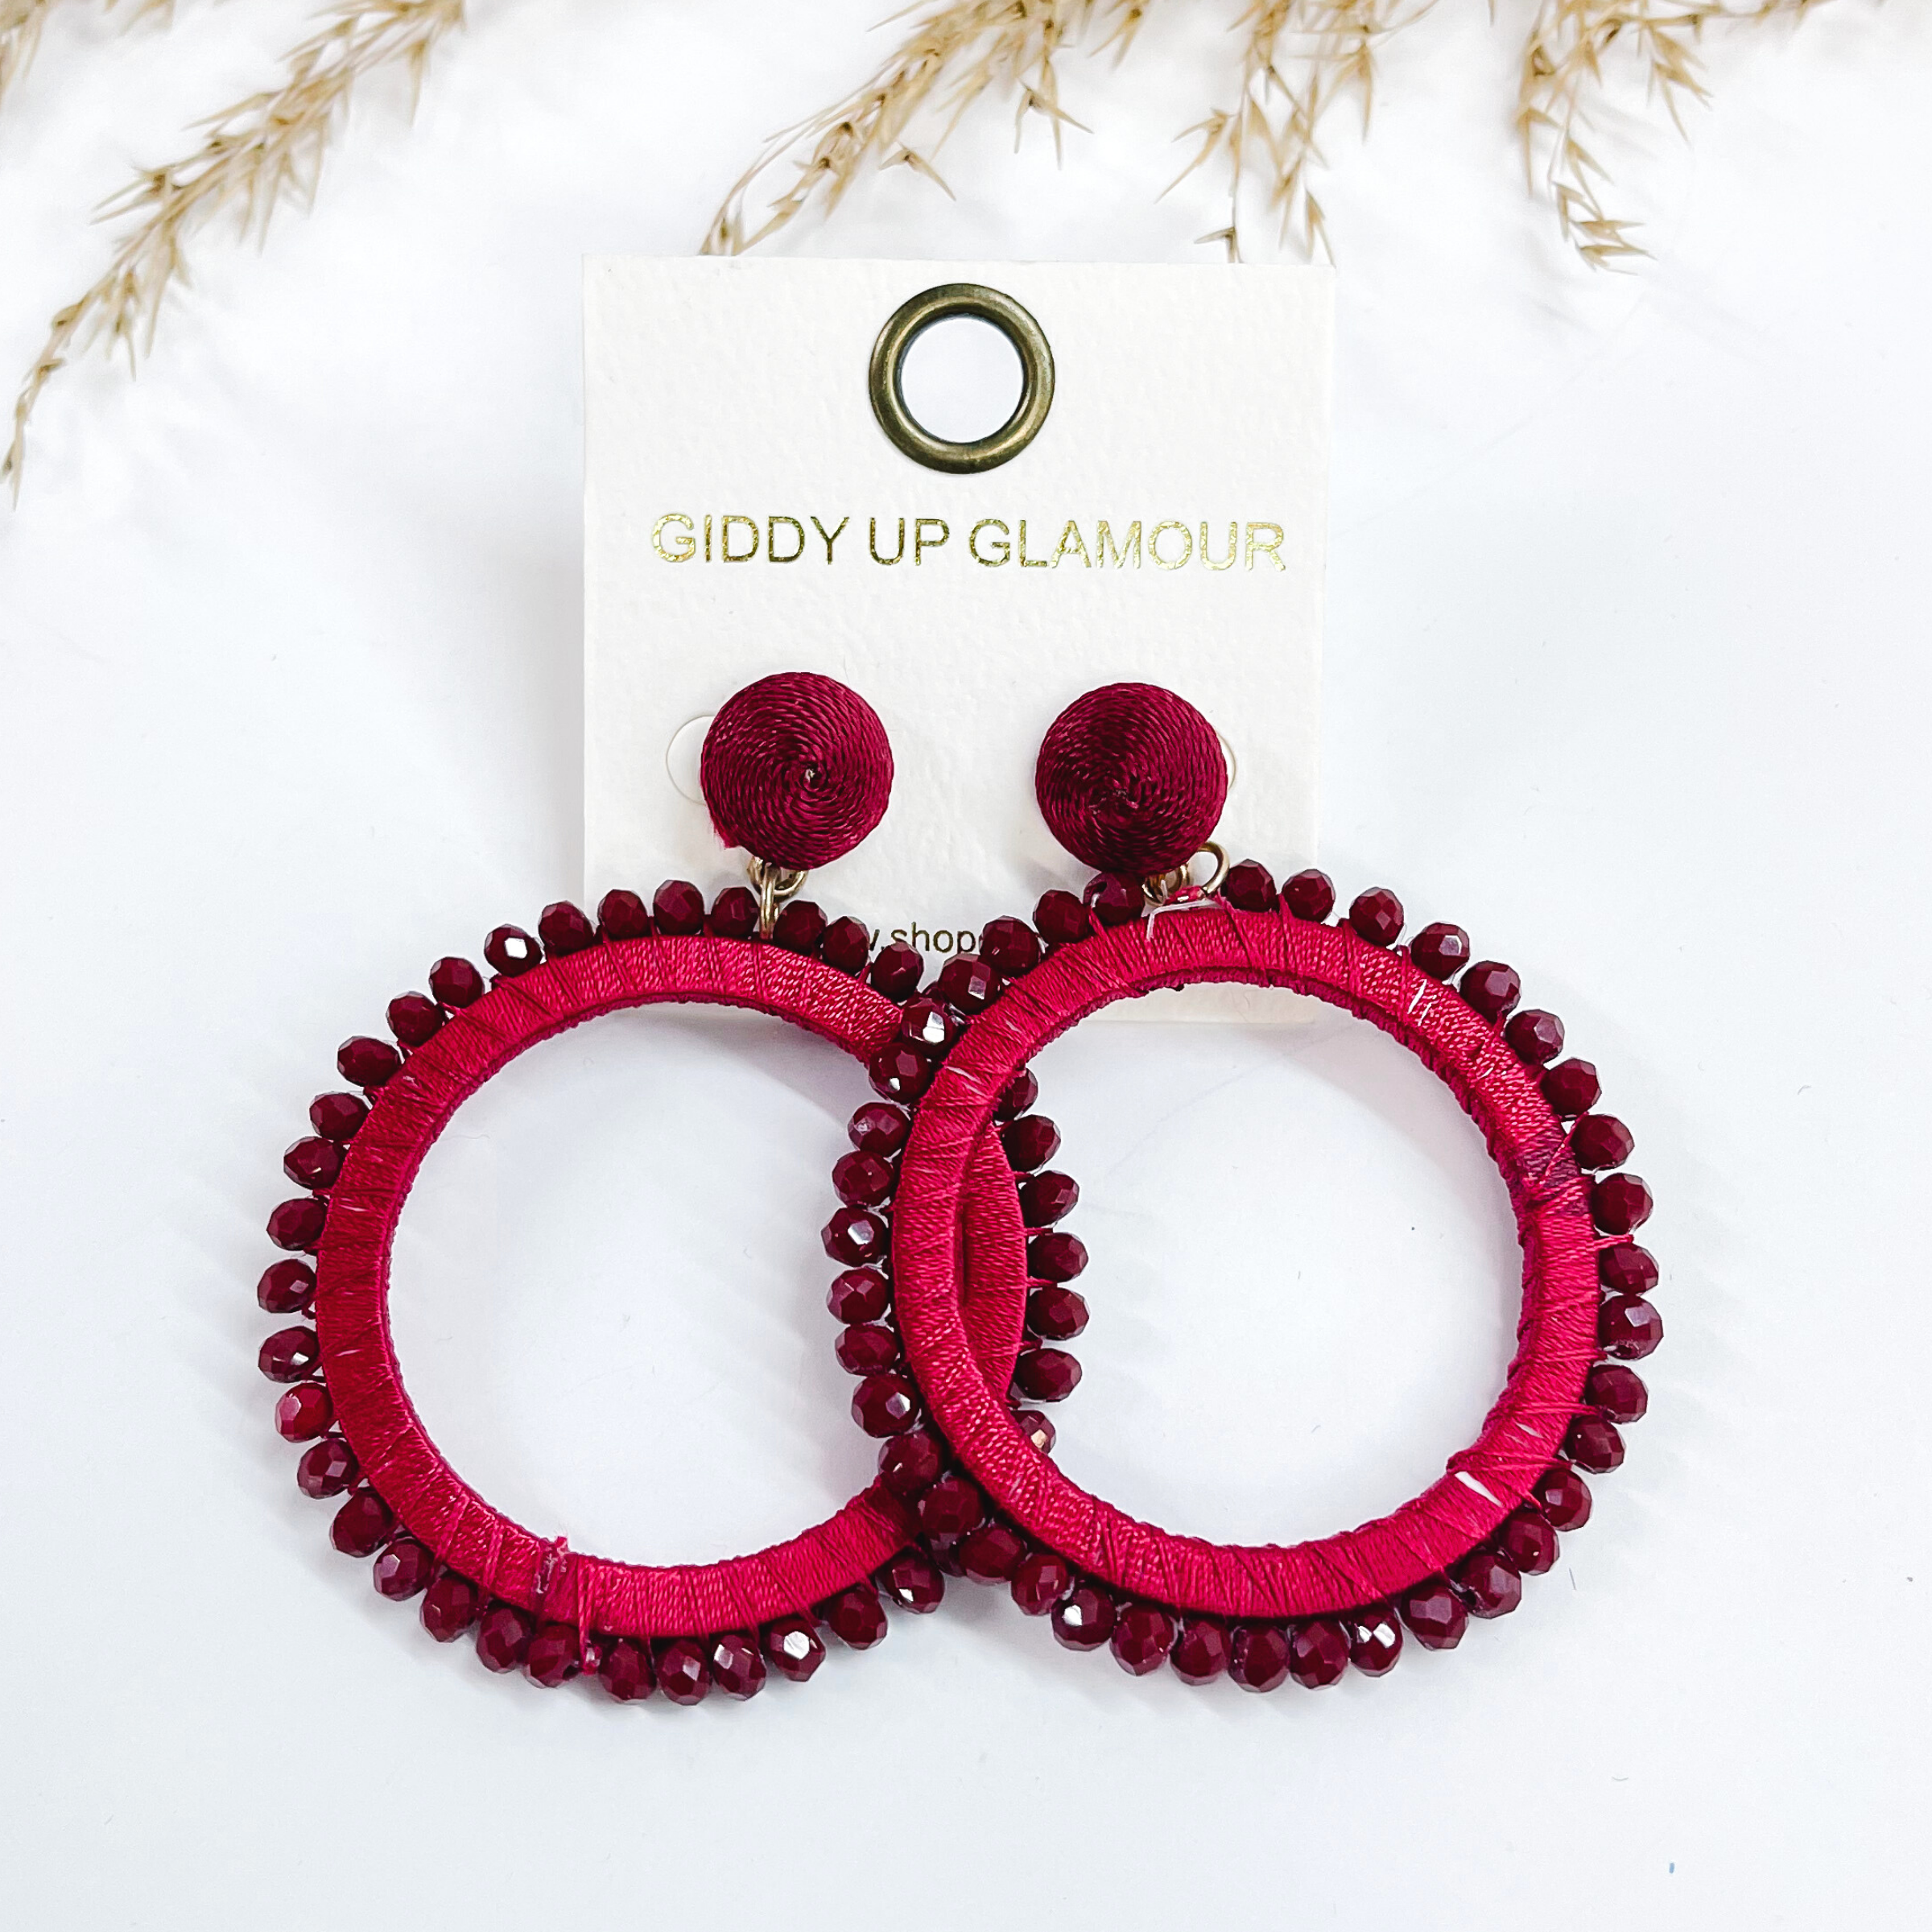 Burgundy post back circle drop earrings. Burgundy colored beads all around the circle and the circle is wrapped with burgundy colored thread.  Taken on a white background with a brown plant in the back as decor.